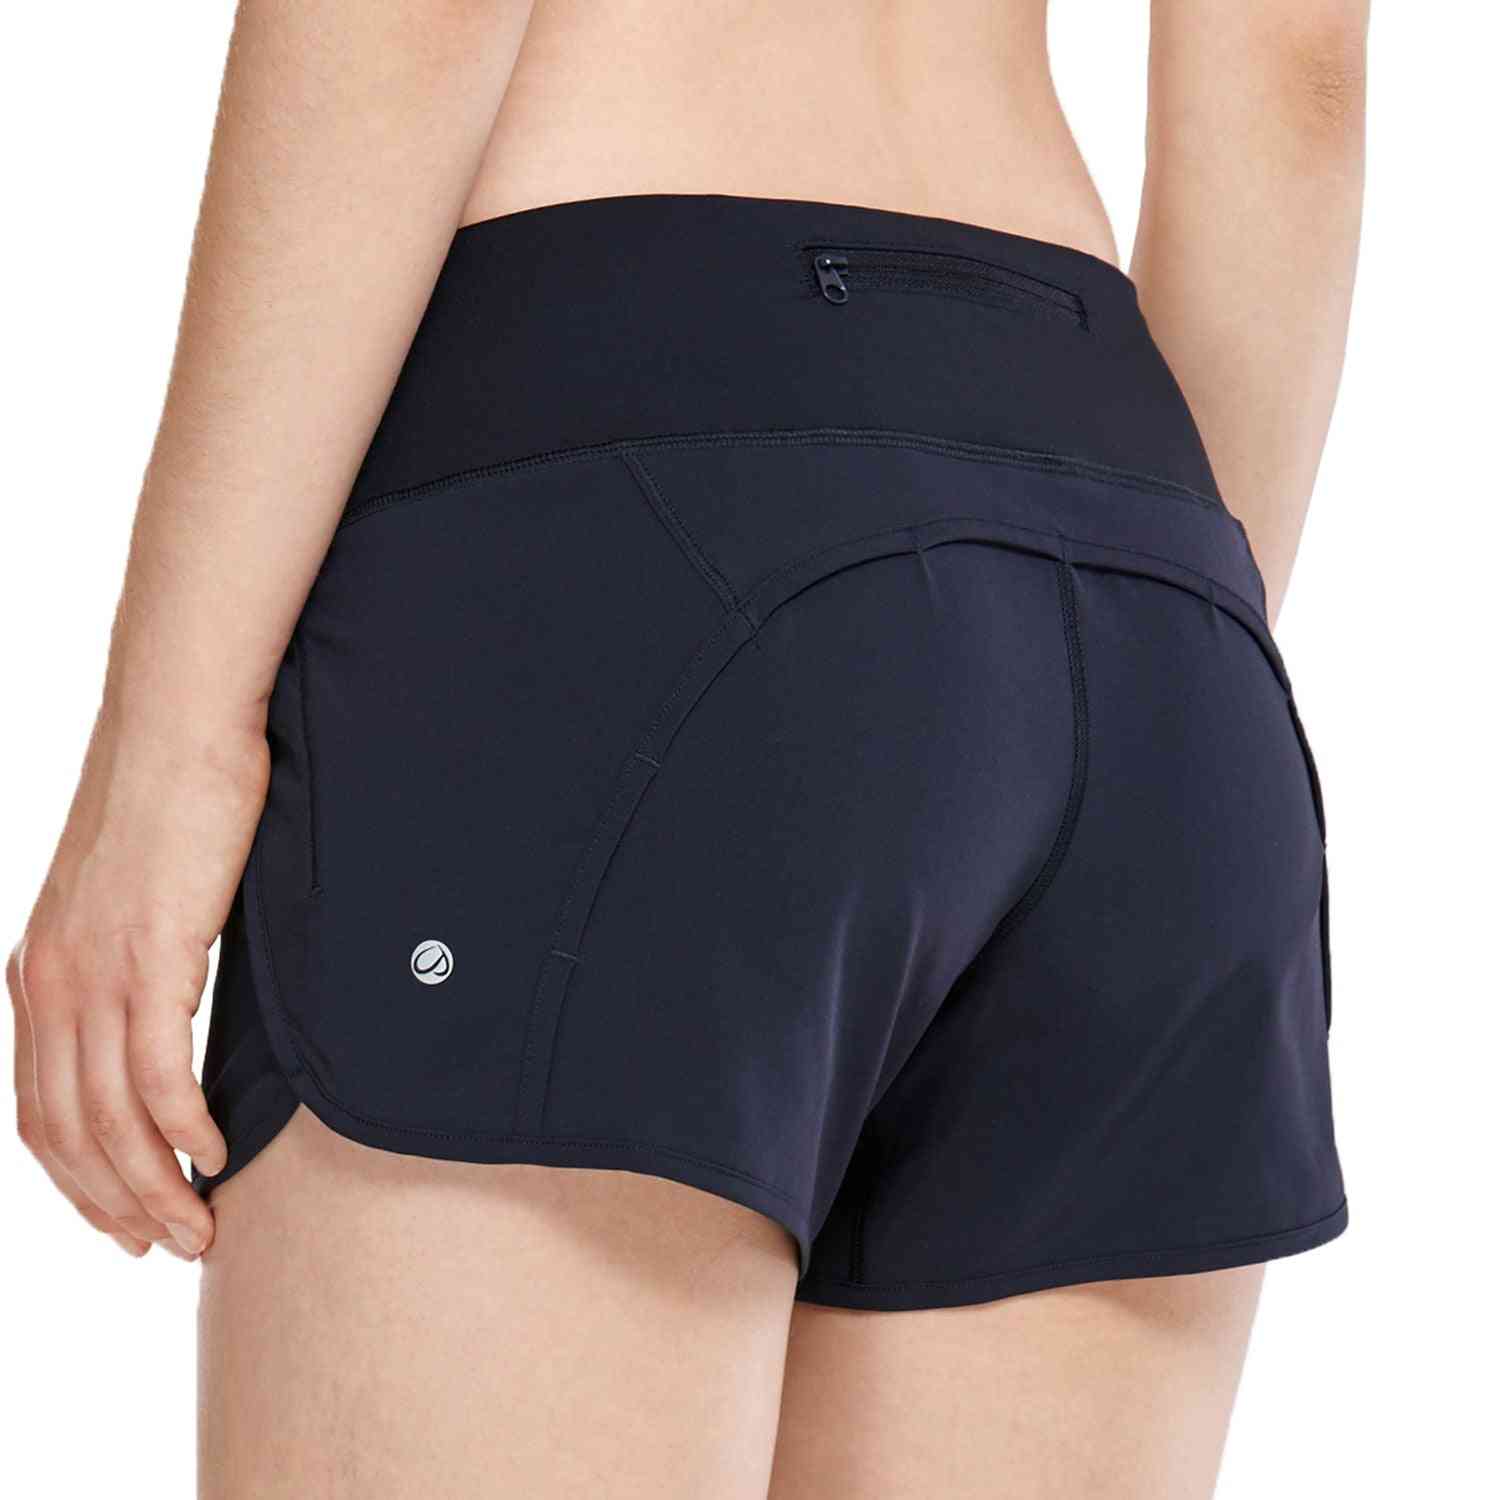 Women's Athletic, Workout, Sports Shorts With Zip Pocket